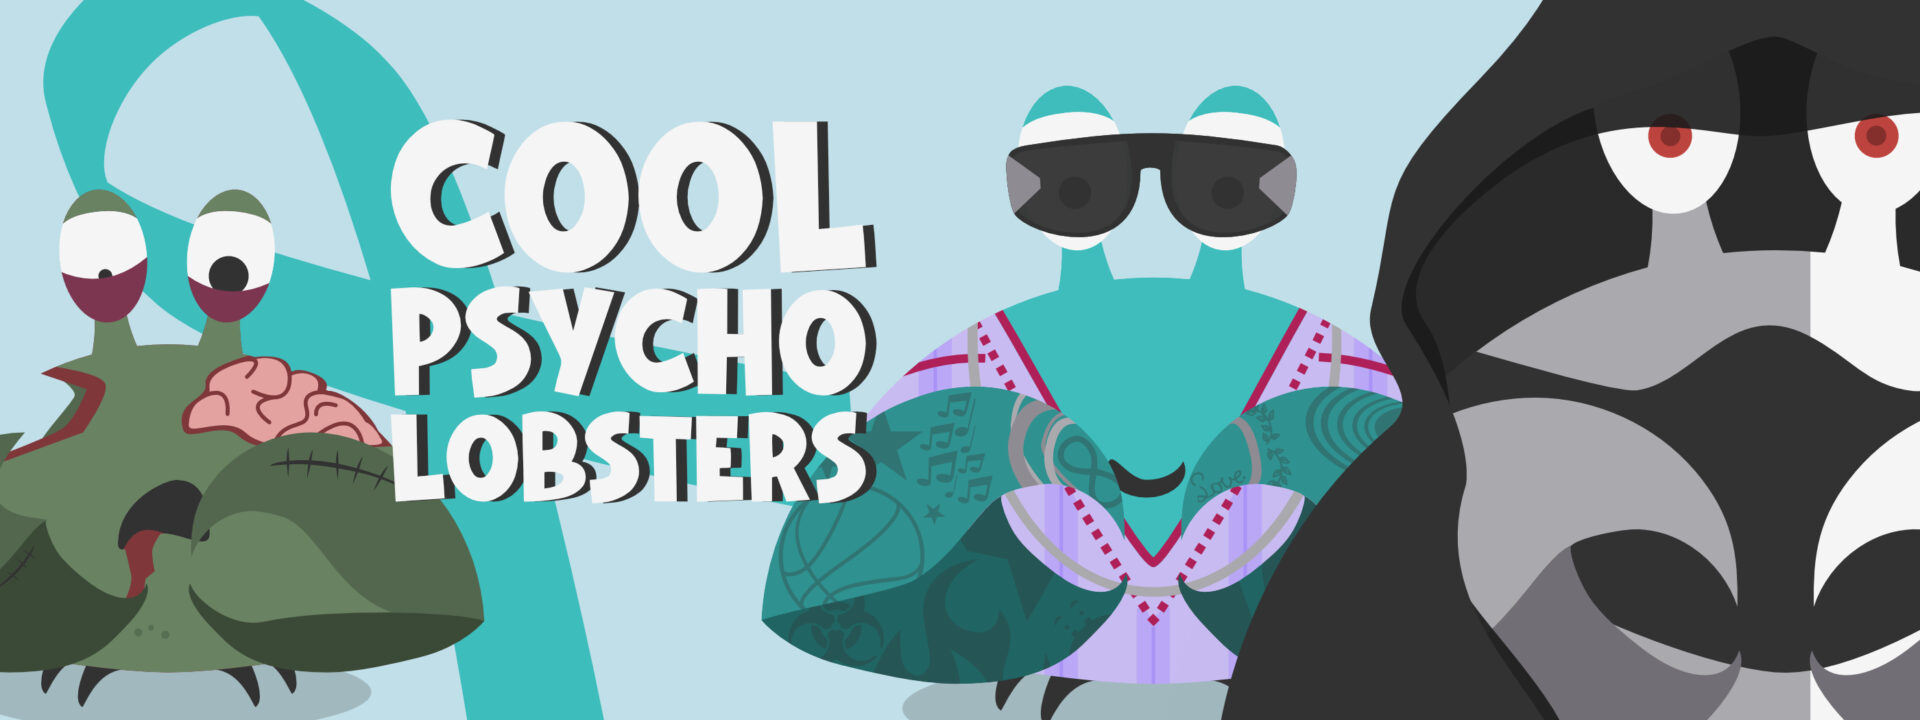 cool psycho lobsters banner